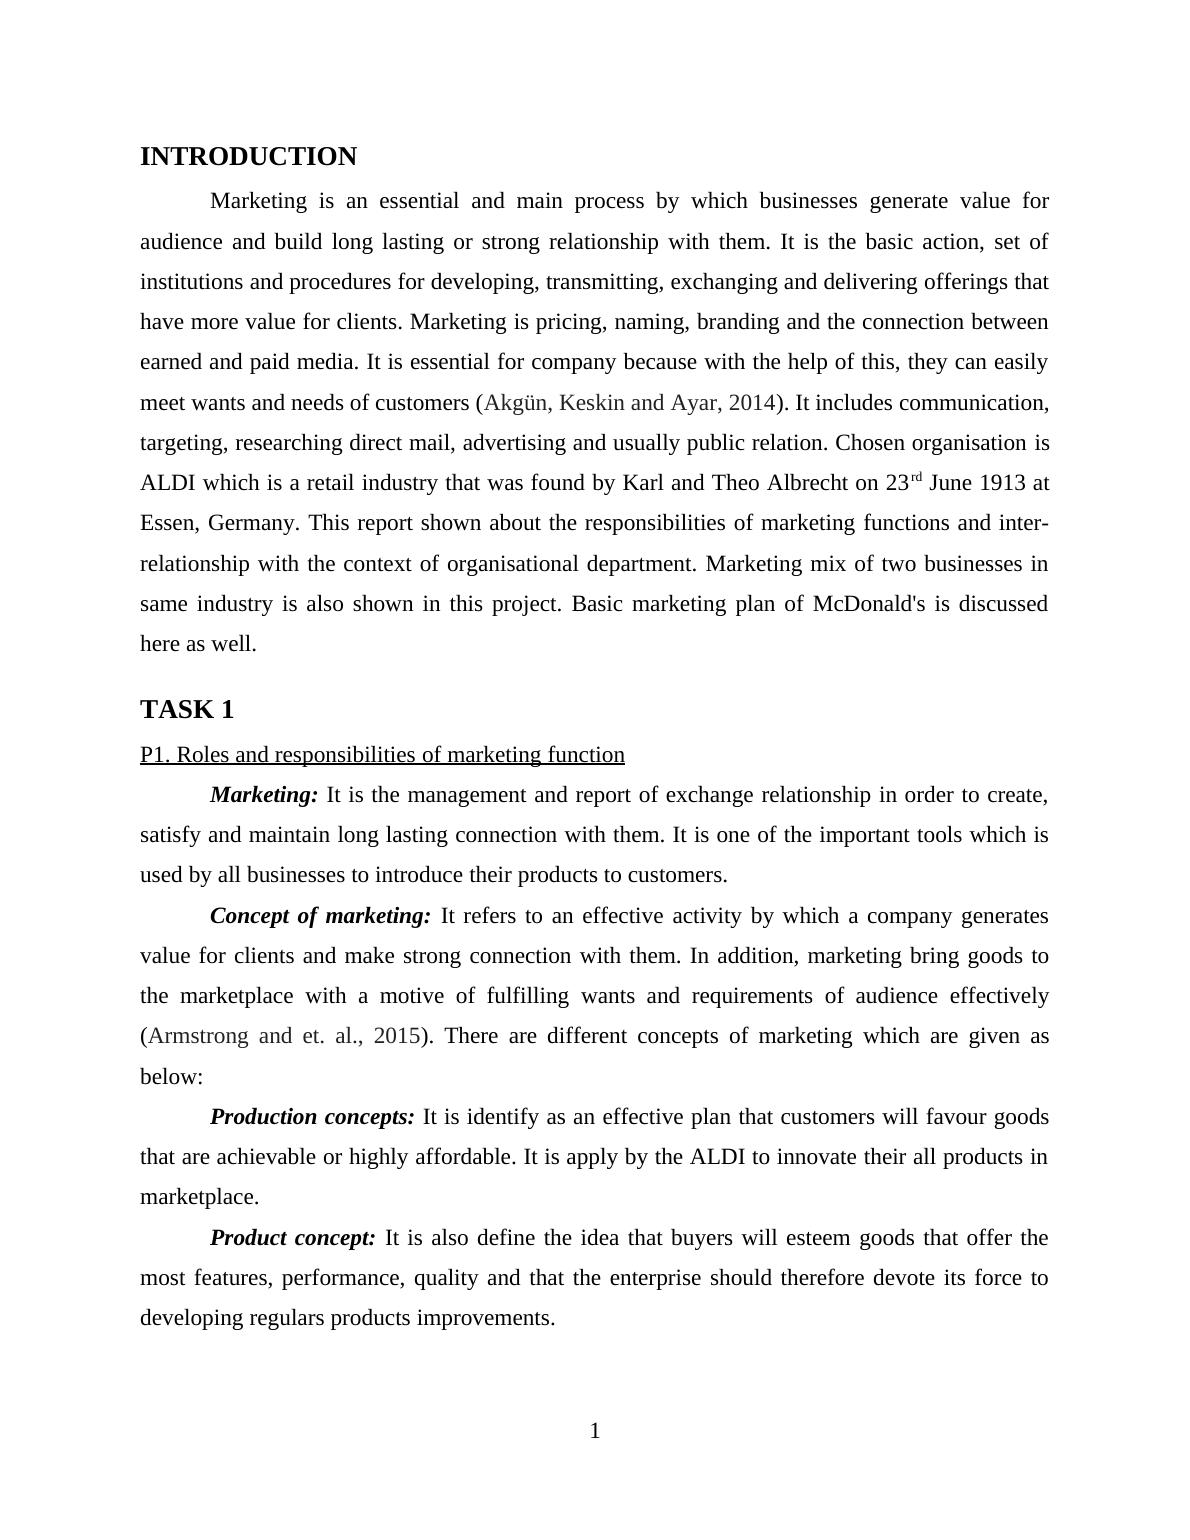 Report on Responsibilities of Marketing Functions_3